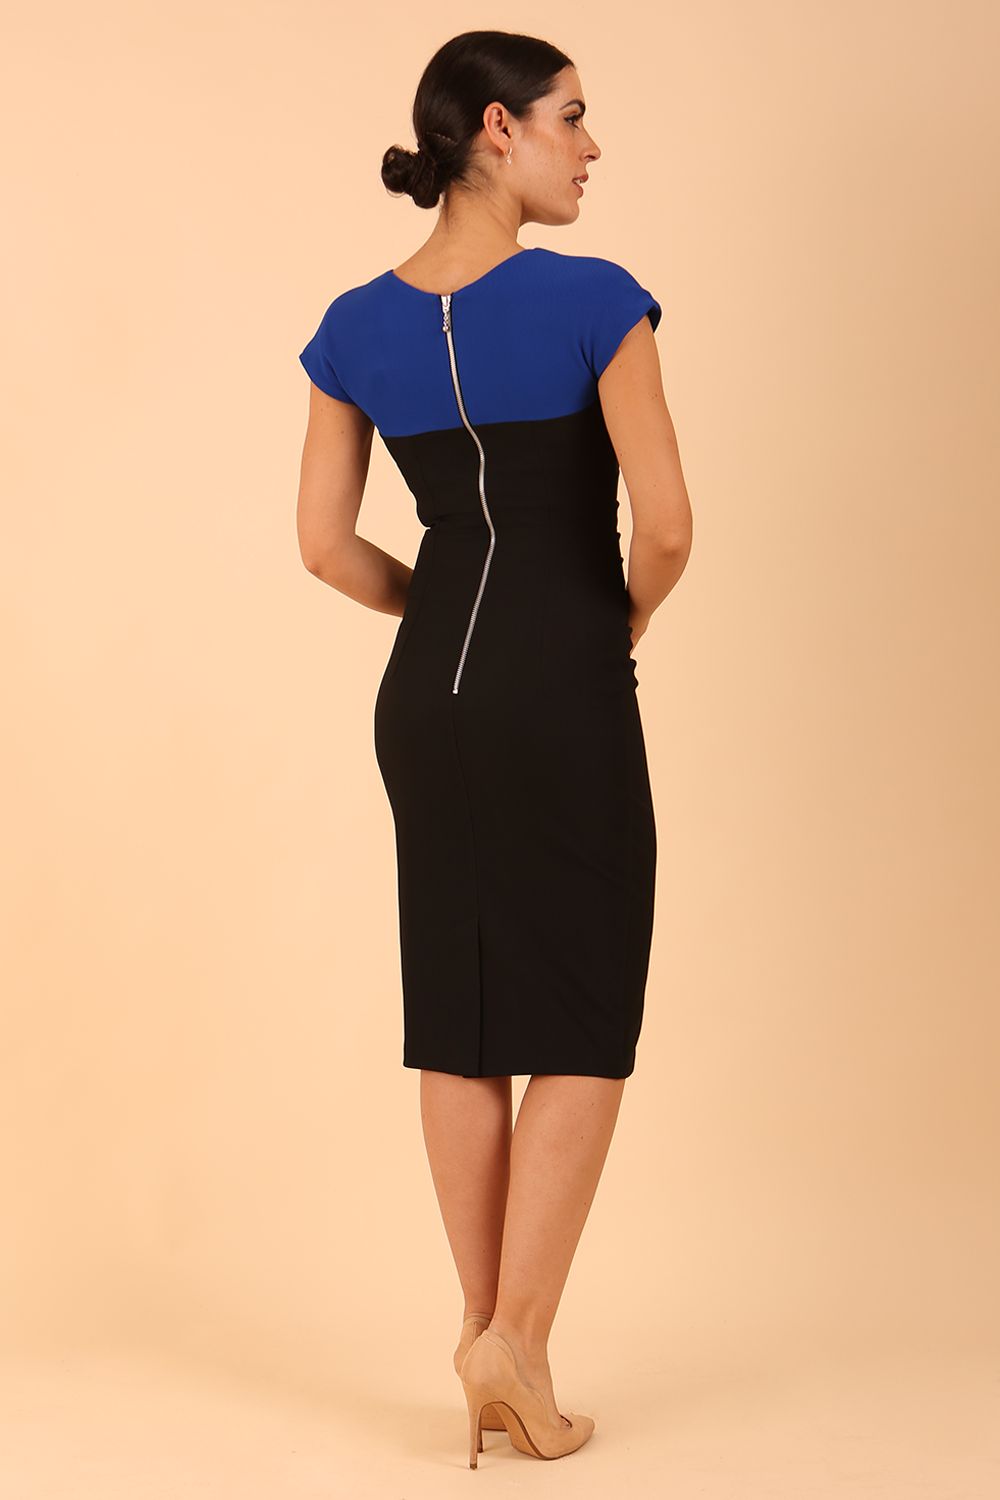 Model wearing the Diva Bryony Contrast dress with contrasting top and exposed zip at the back in black and cobalt blue back image